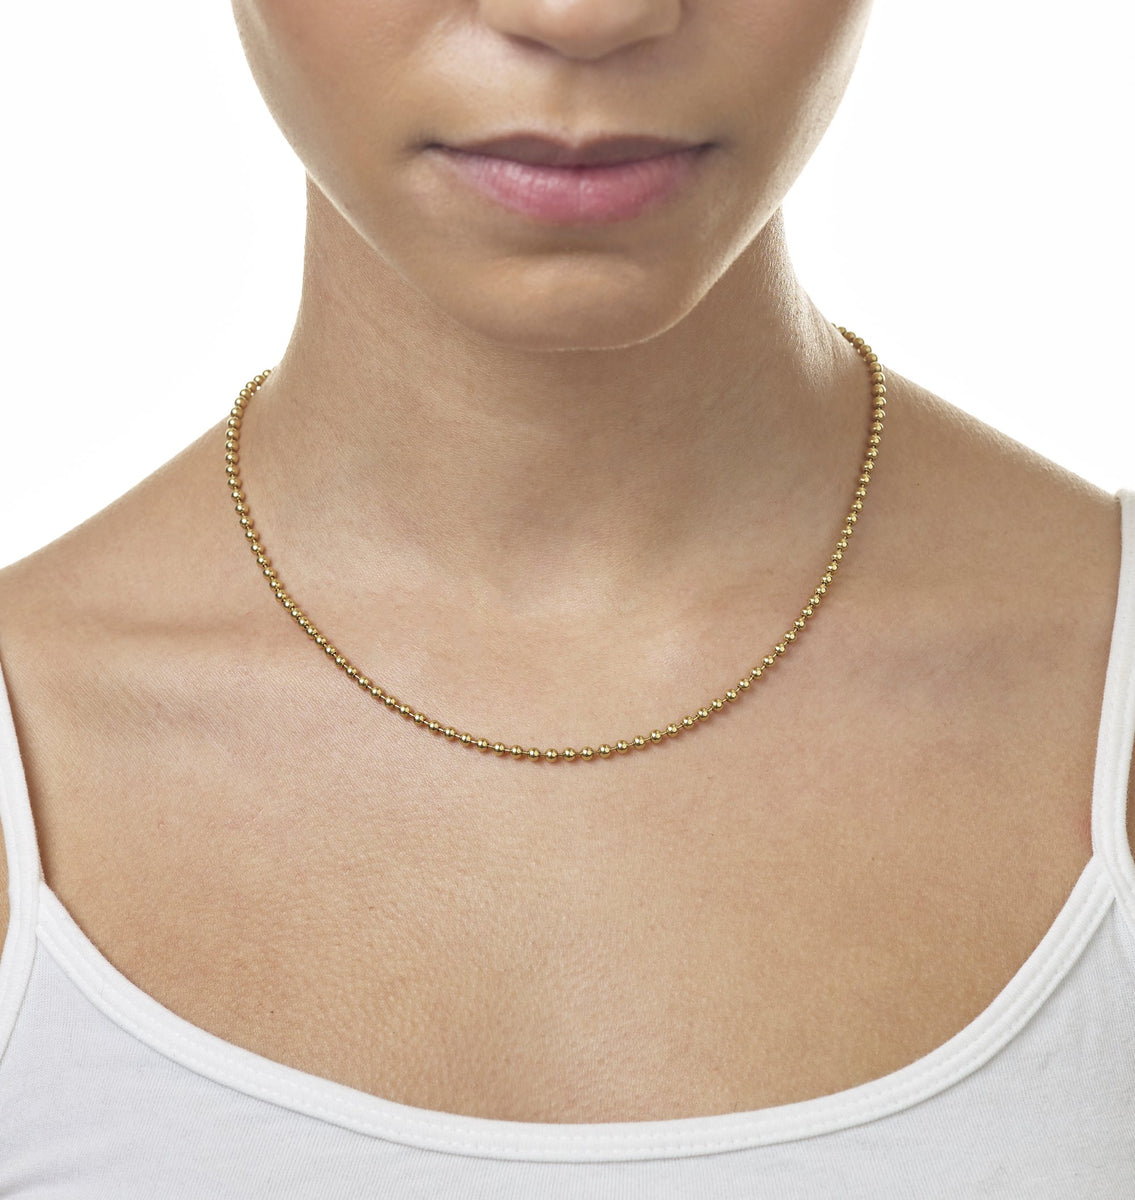 Hellen.V - Silver Chain Necklace